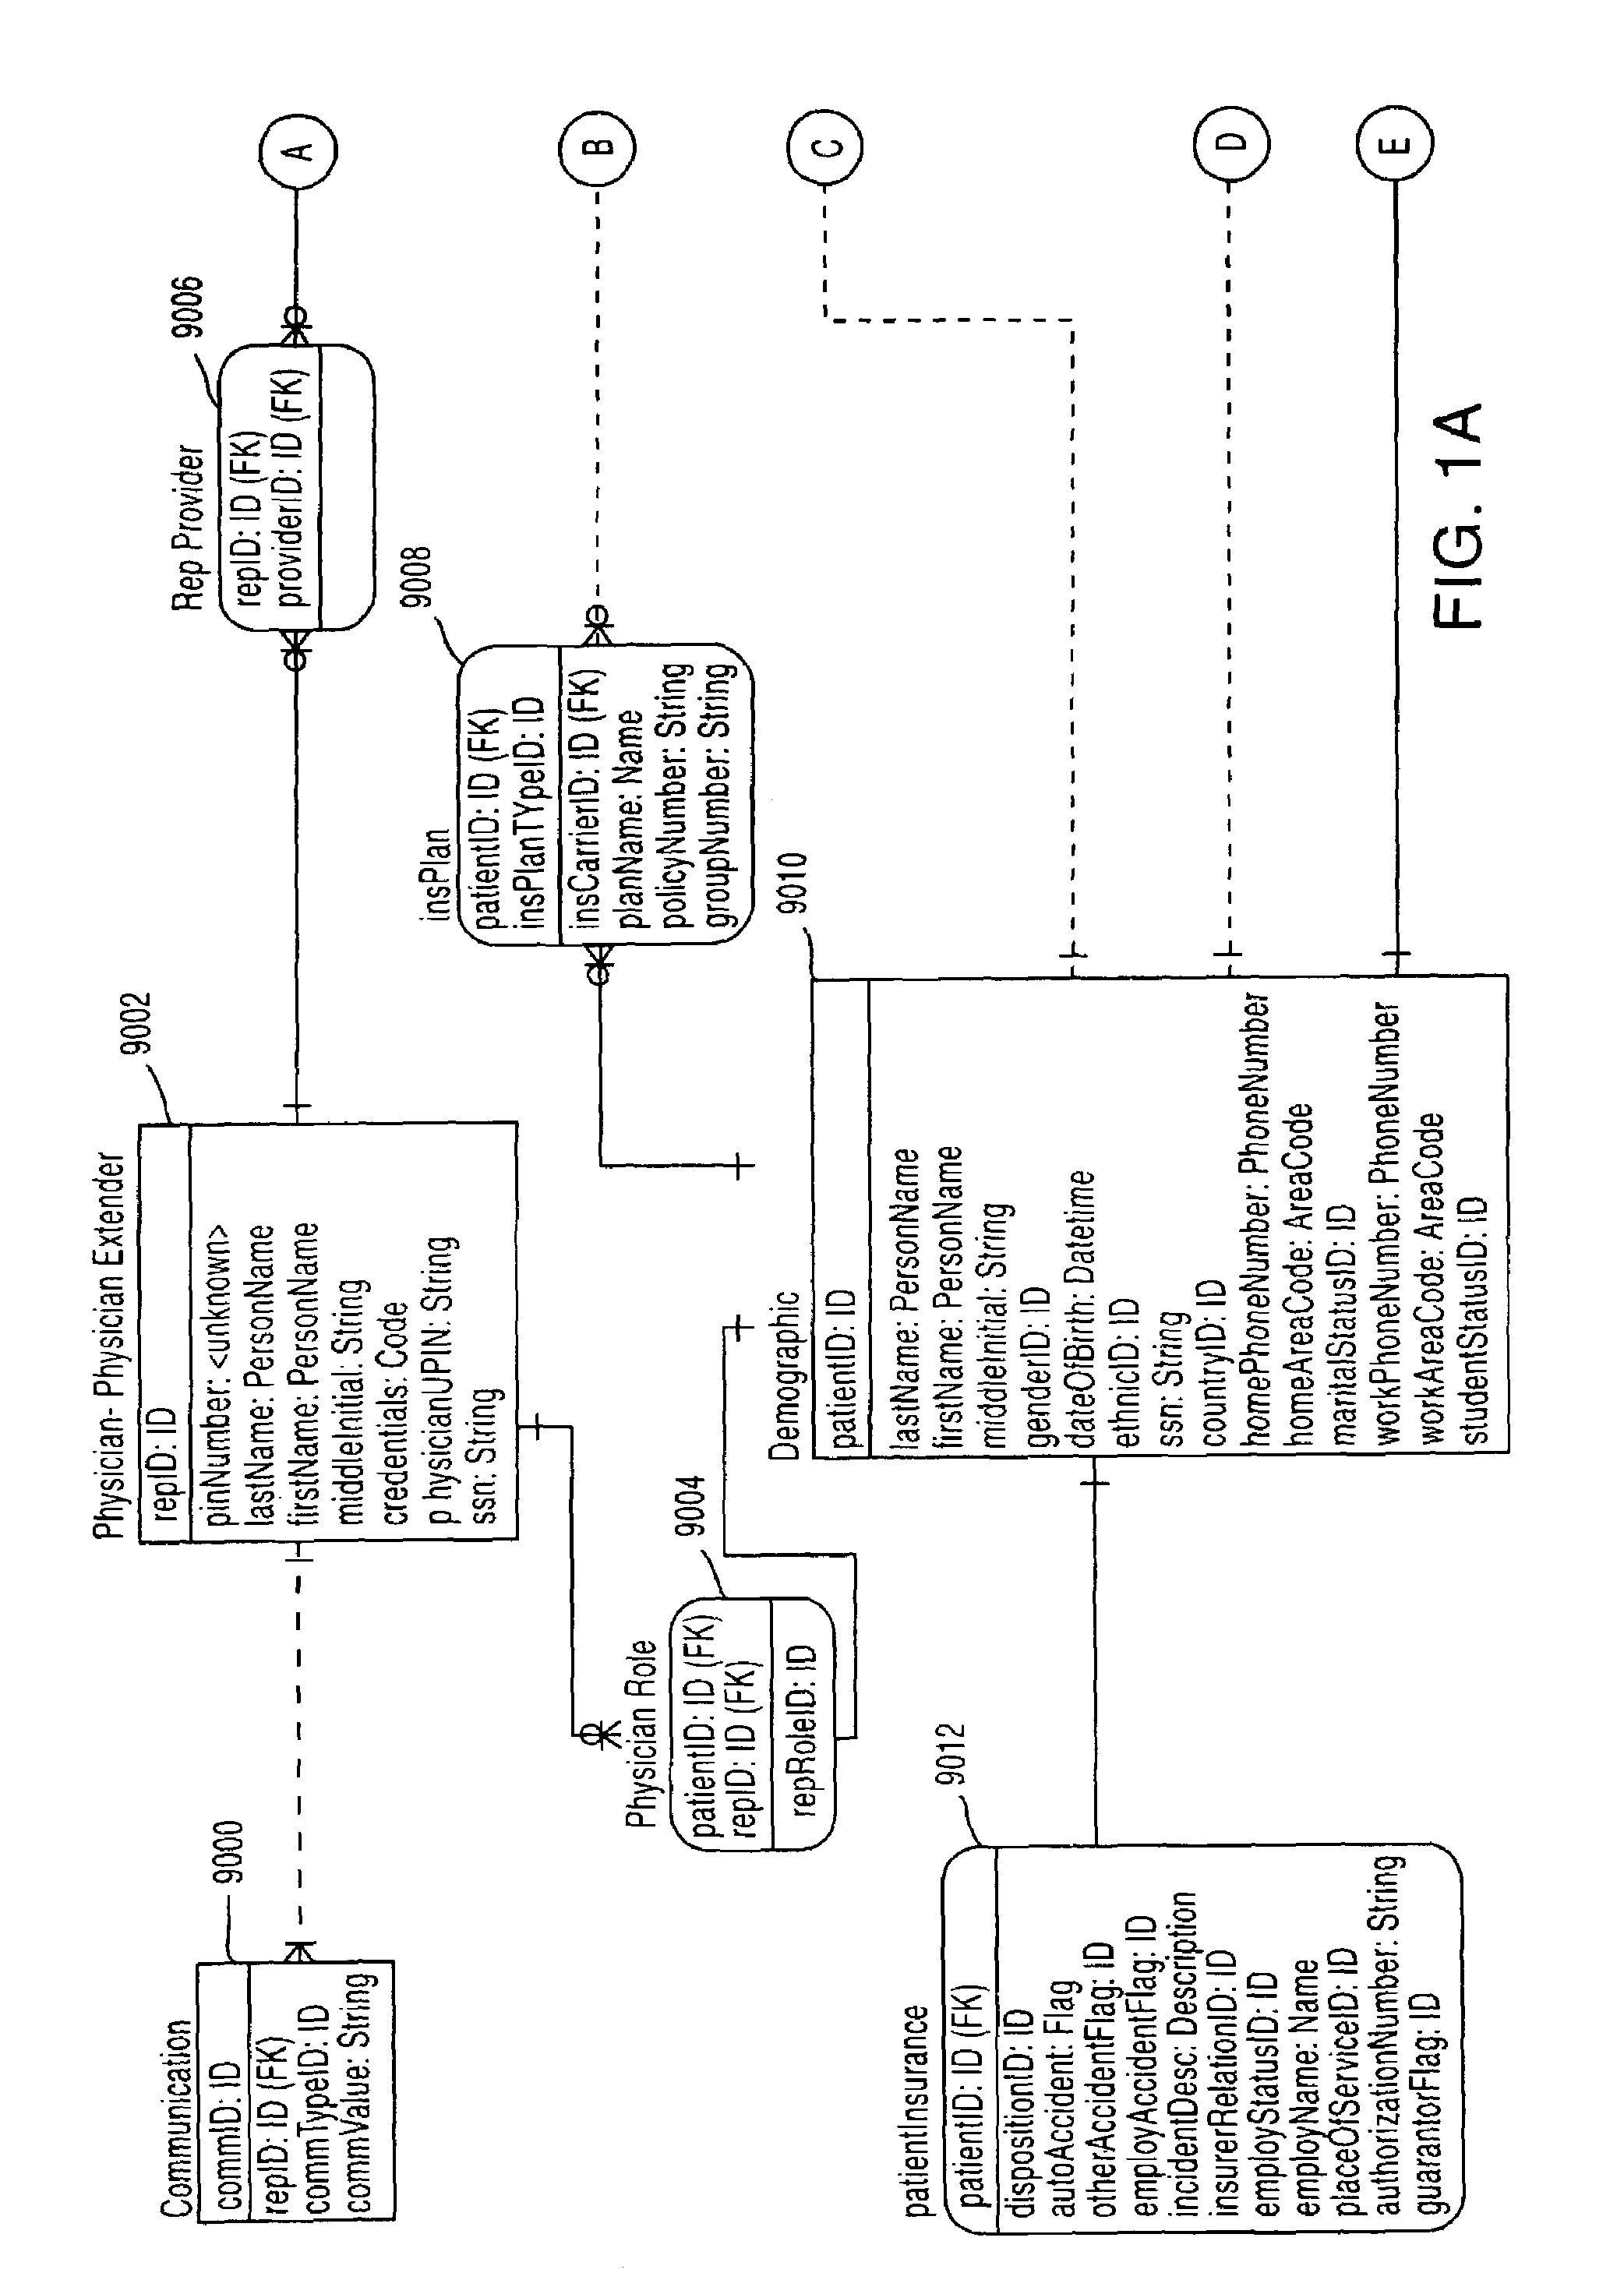 System and method for video observation of a patient in a health care location